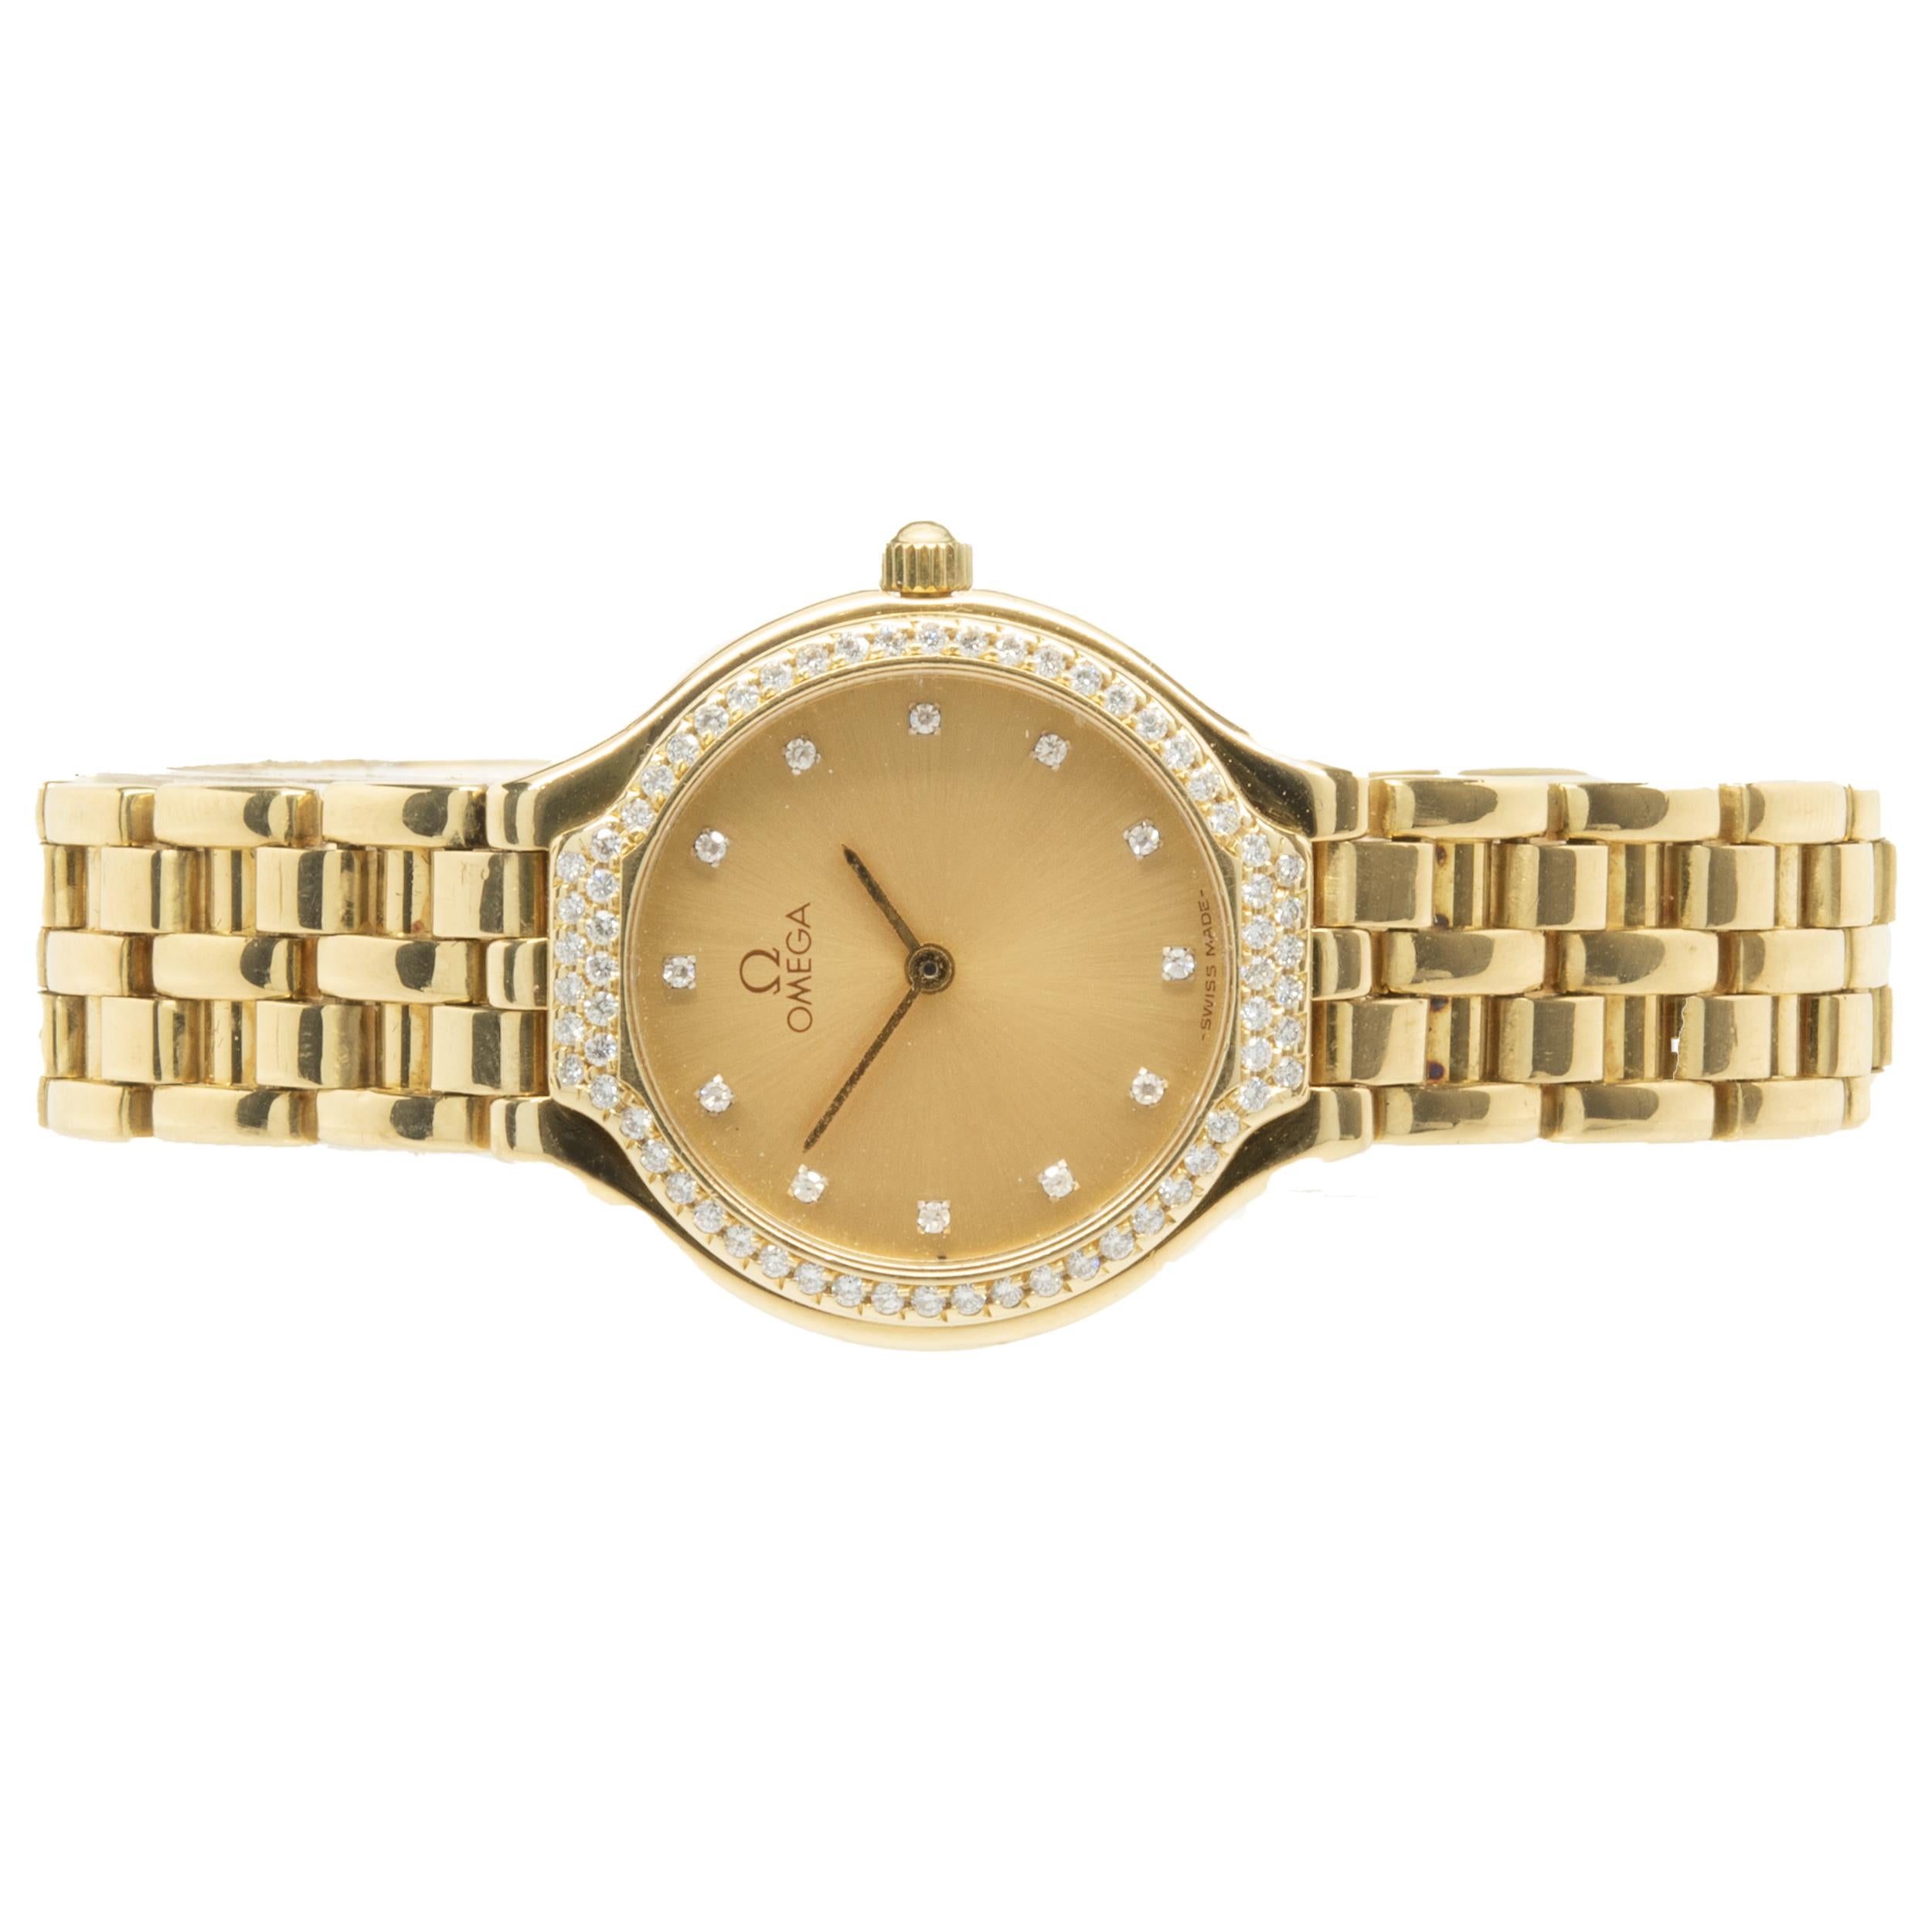 Brand: Omega
Movement: quartz
Function: hours, minutes
Case: 24mm 18K yellow gold case, factory diamond bezel
Band: Omega 18K yellow gold link bracelet, fold over clasp
Dial: factory champagne diamond dial
Serial # 54413XXX
Reference #